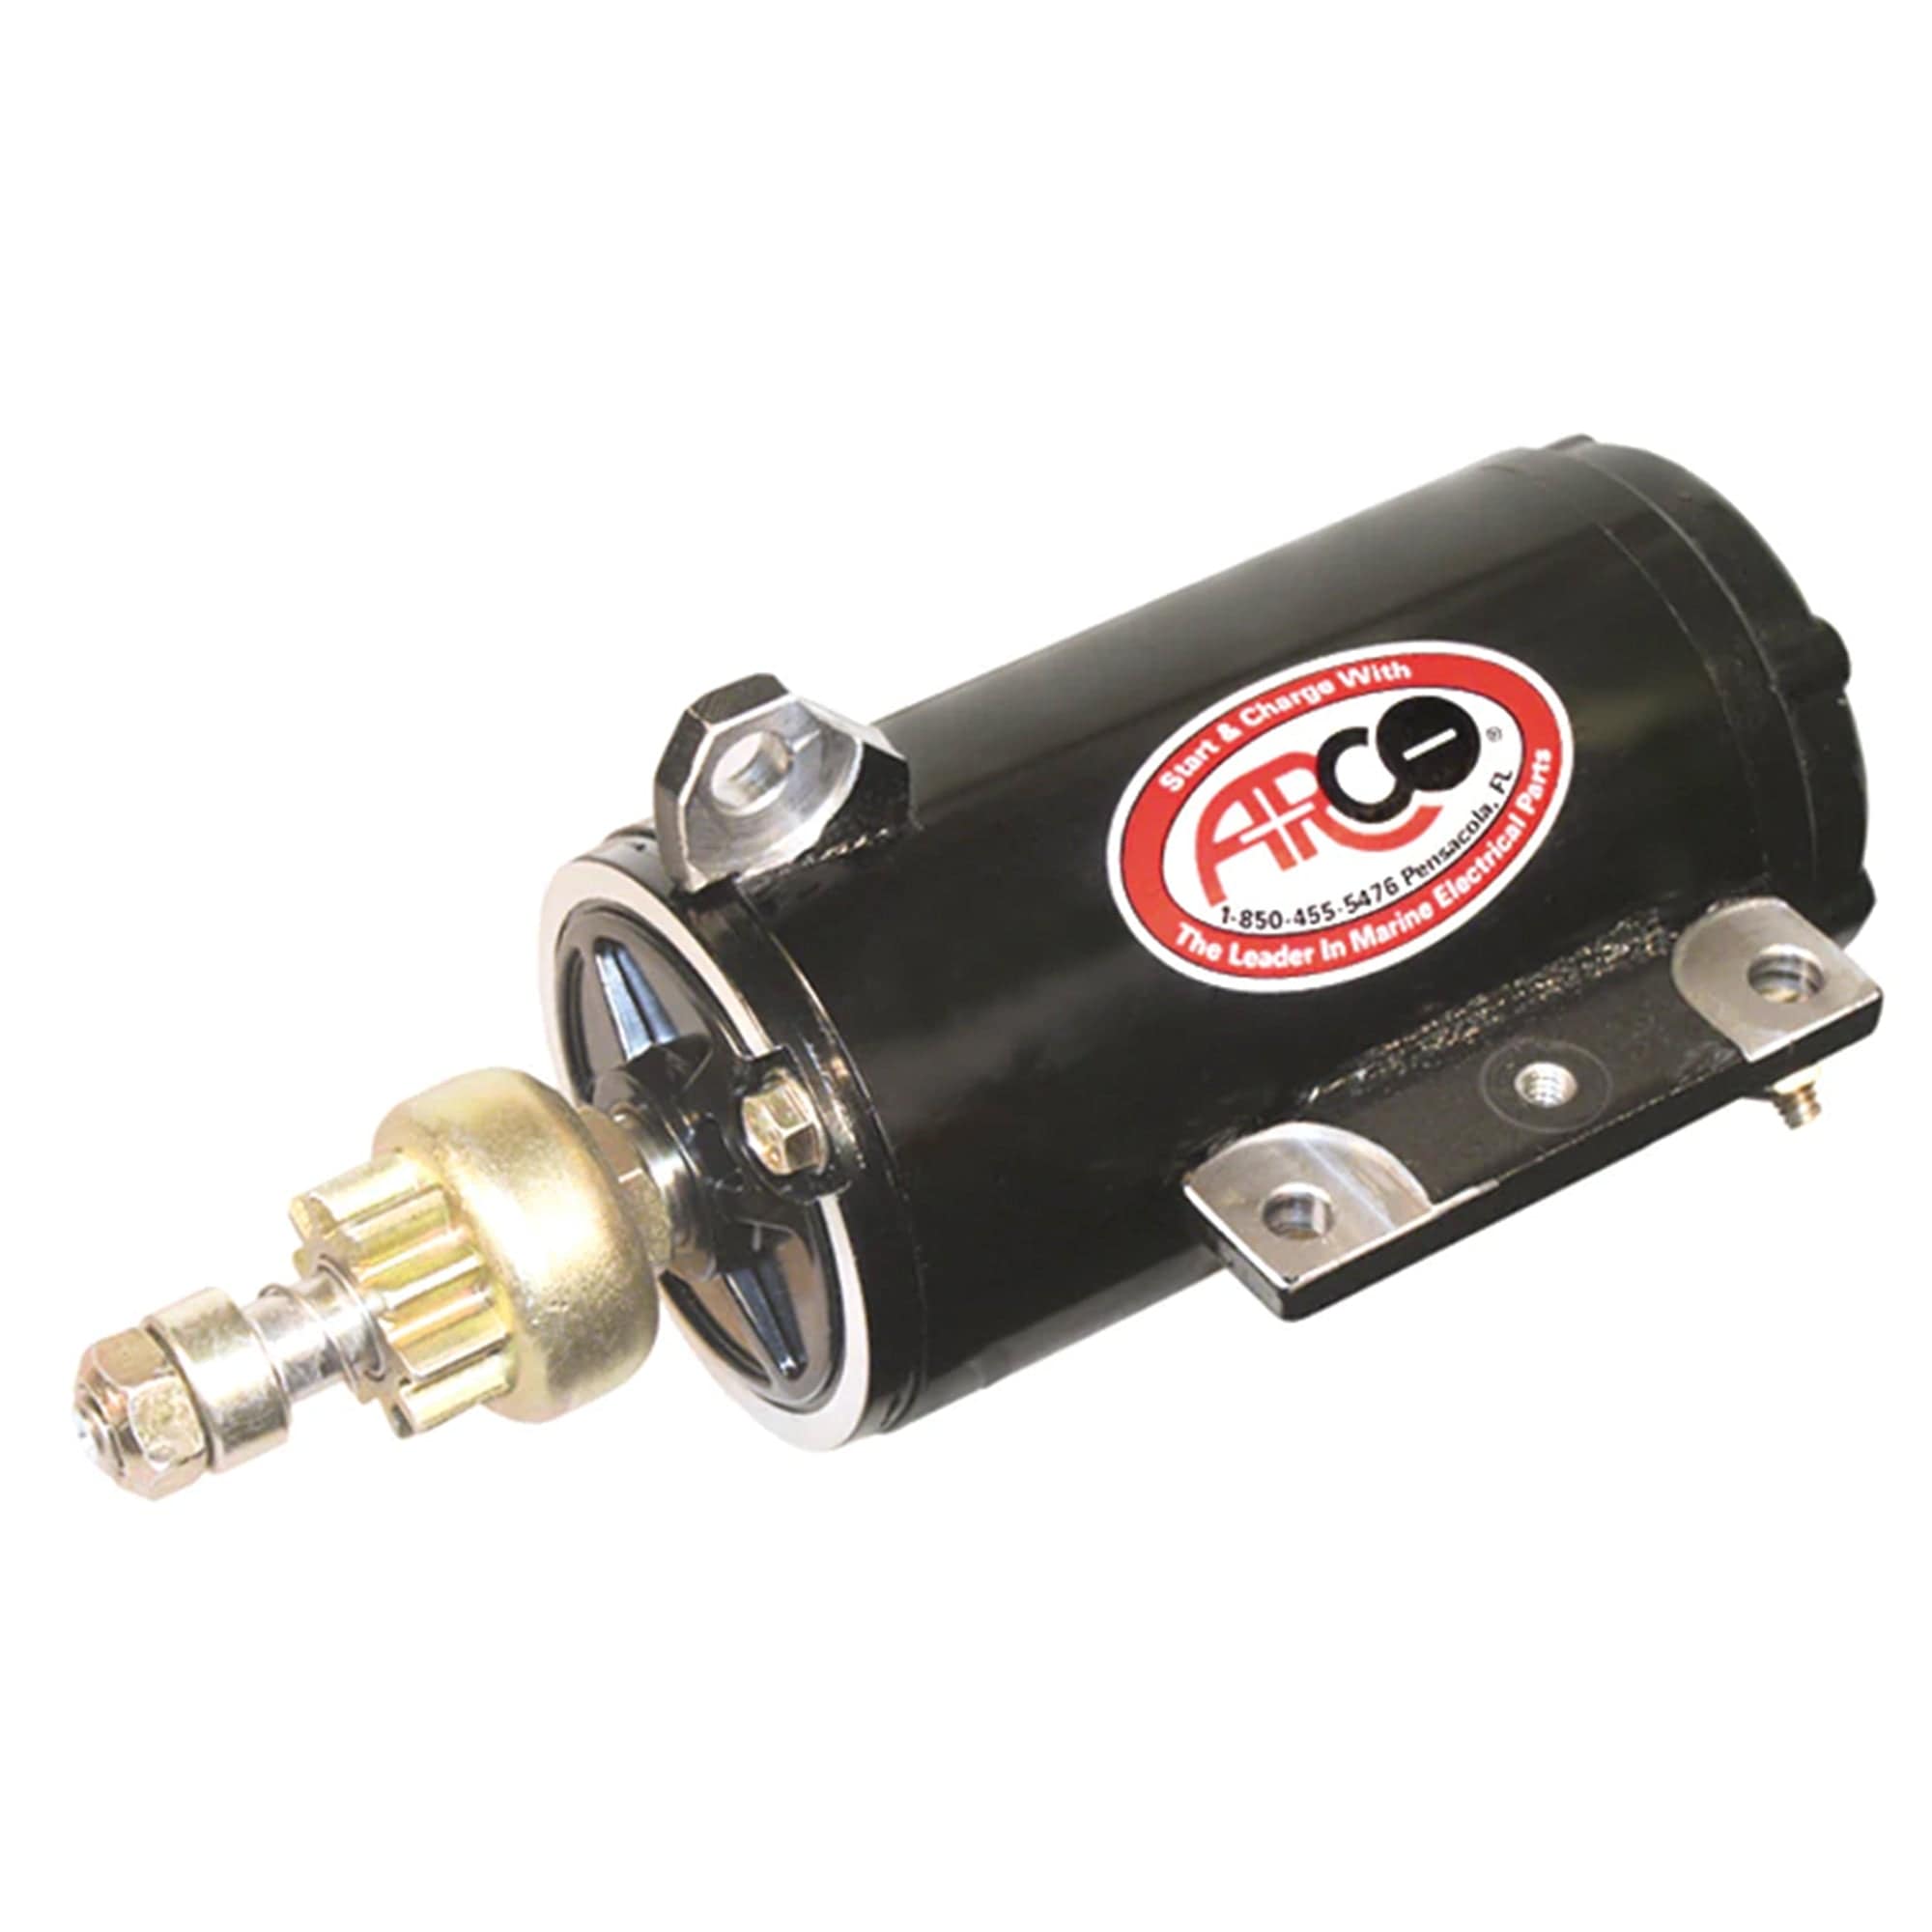 ARCO NEW Original Equipment Quality Replacement Outboard Starter for BRP-OMC - 393570, 585060, 586285, 778994